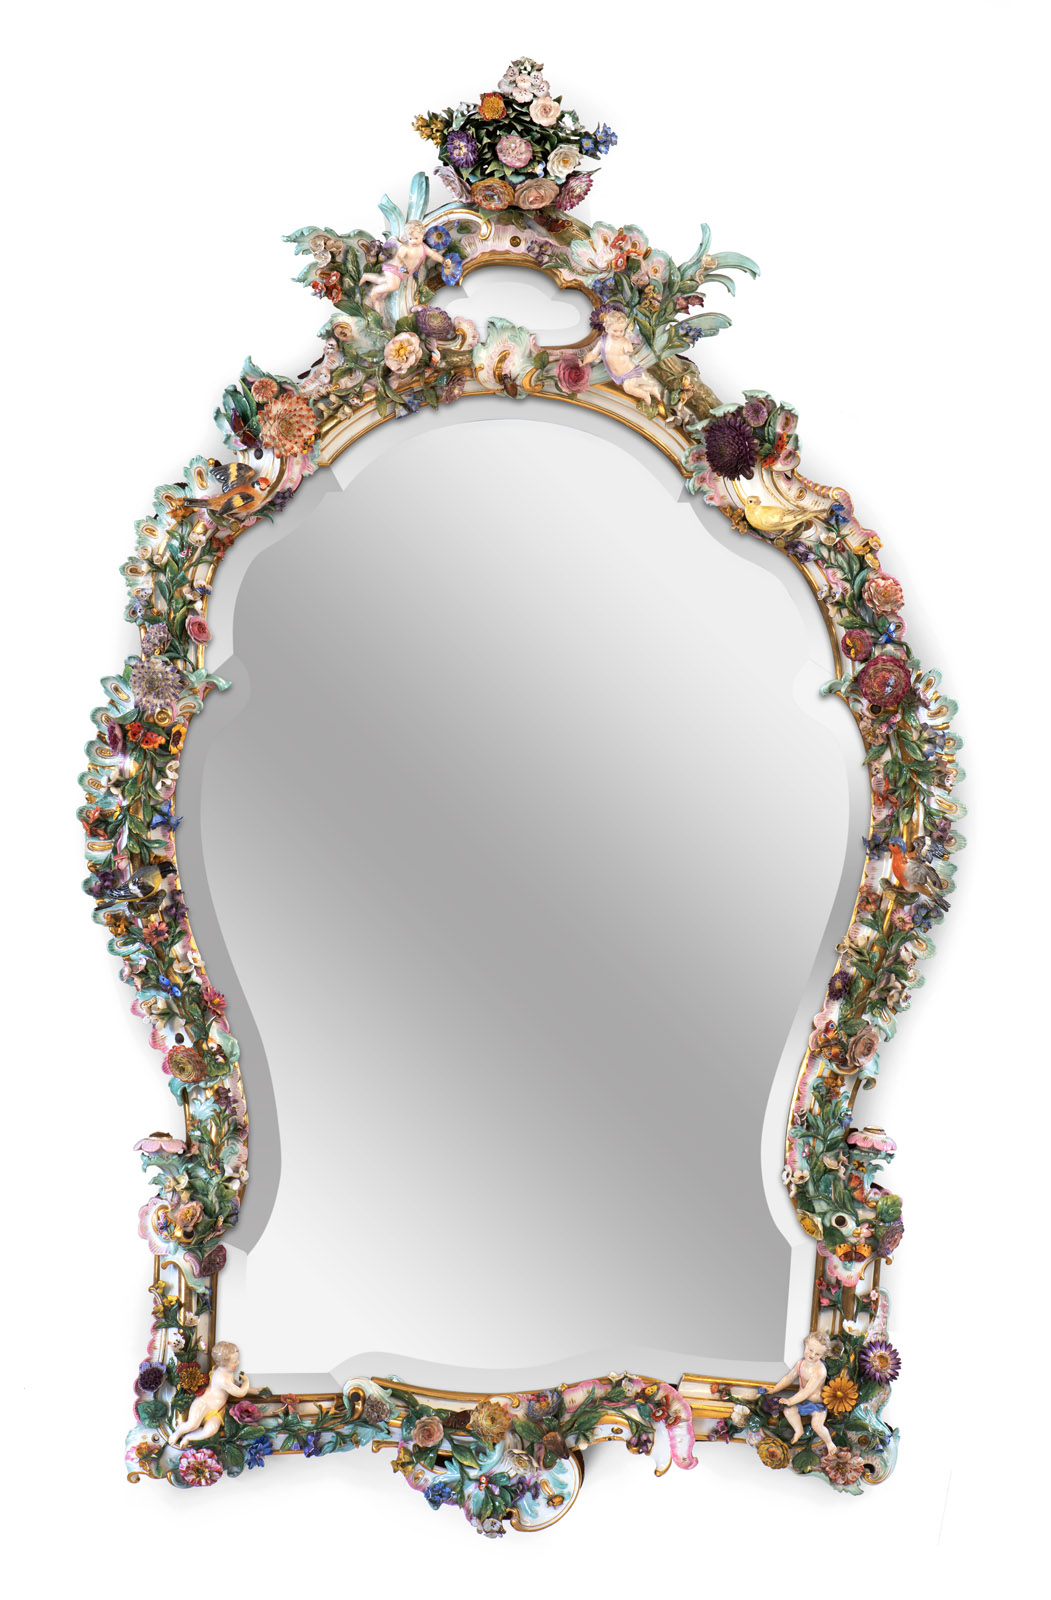 A LARGE ROCOCO STYLE MEISSEN PORCELAIN WALL MIRROR